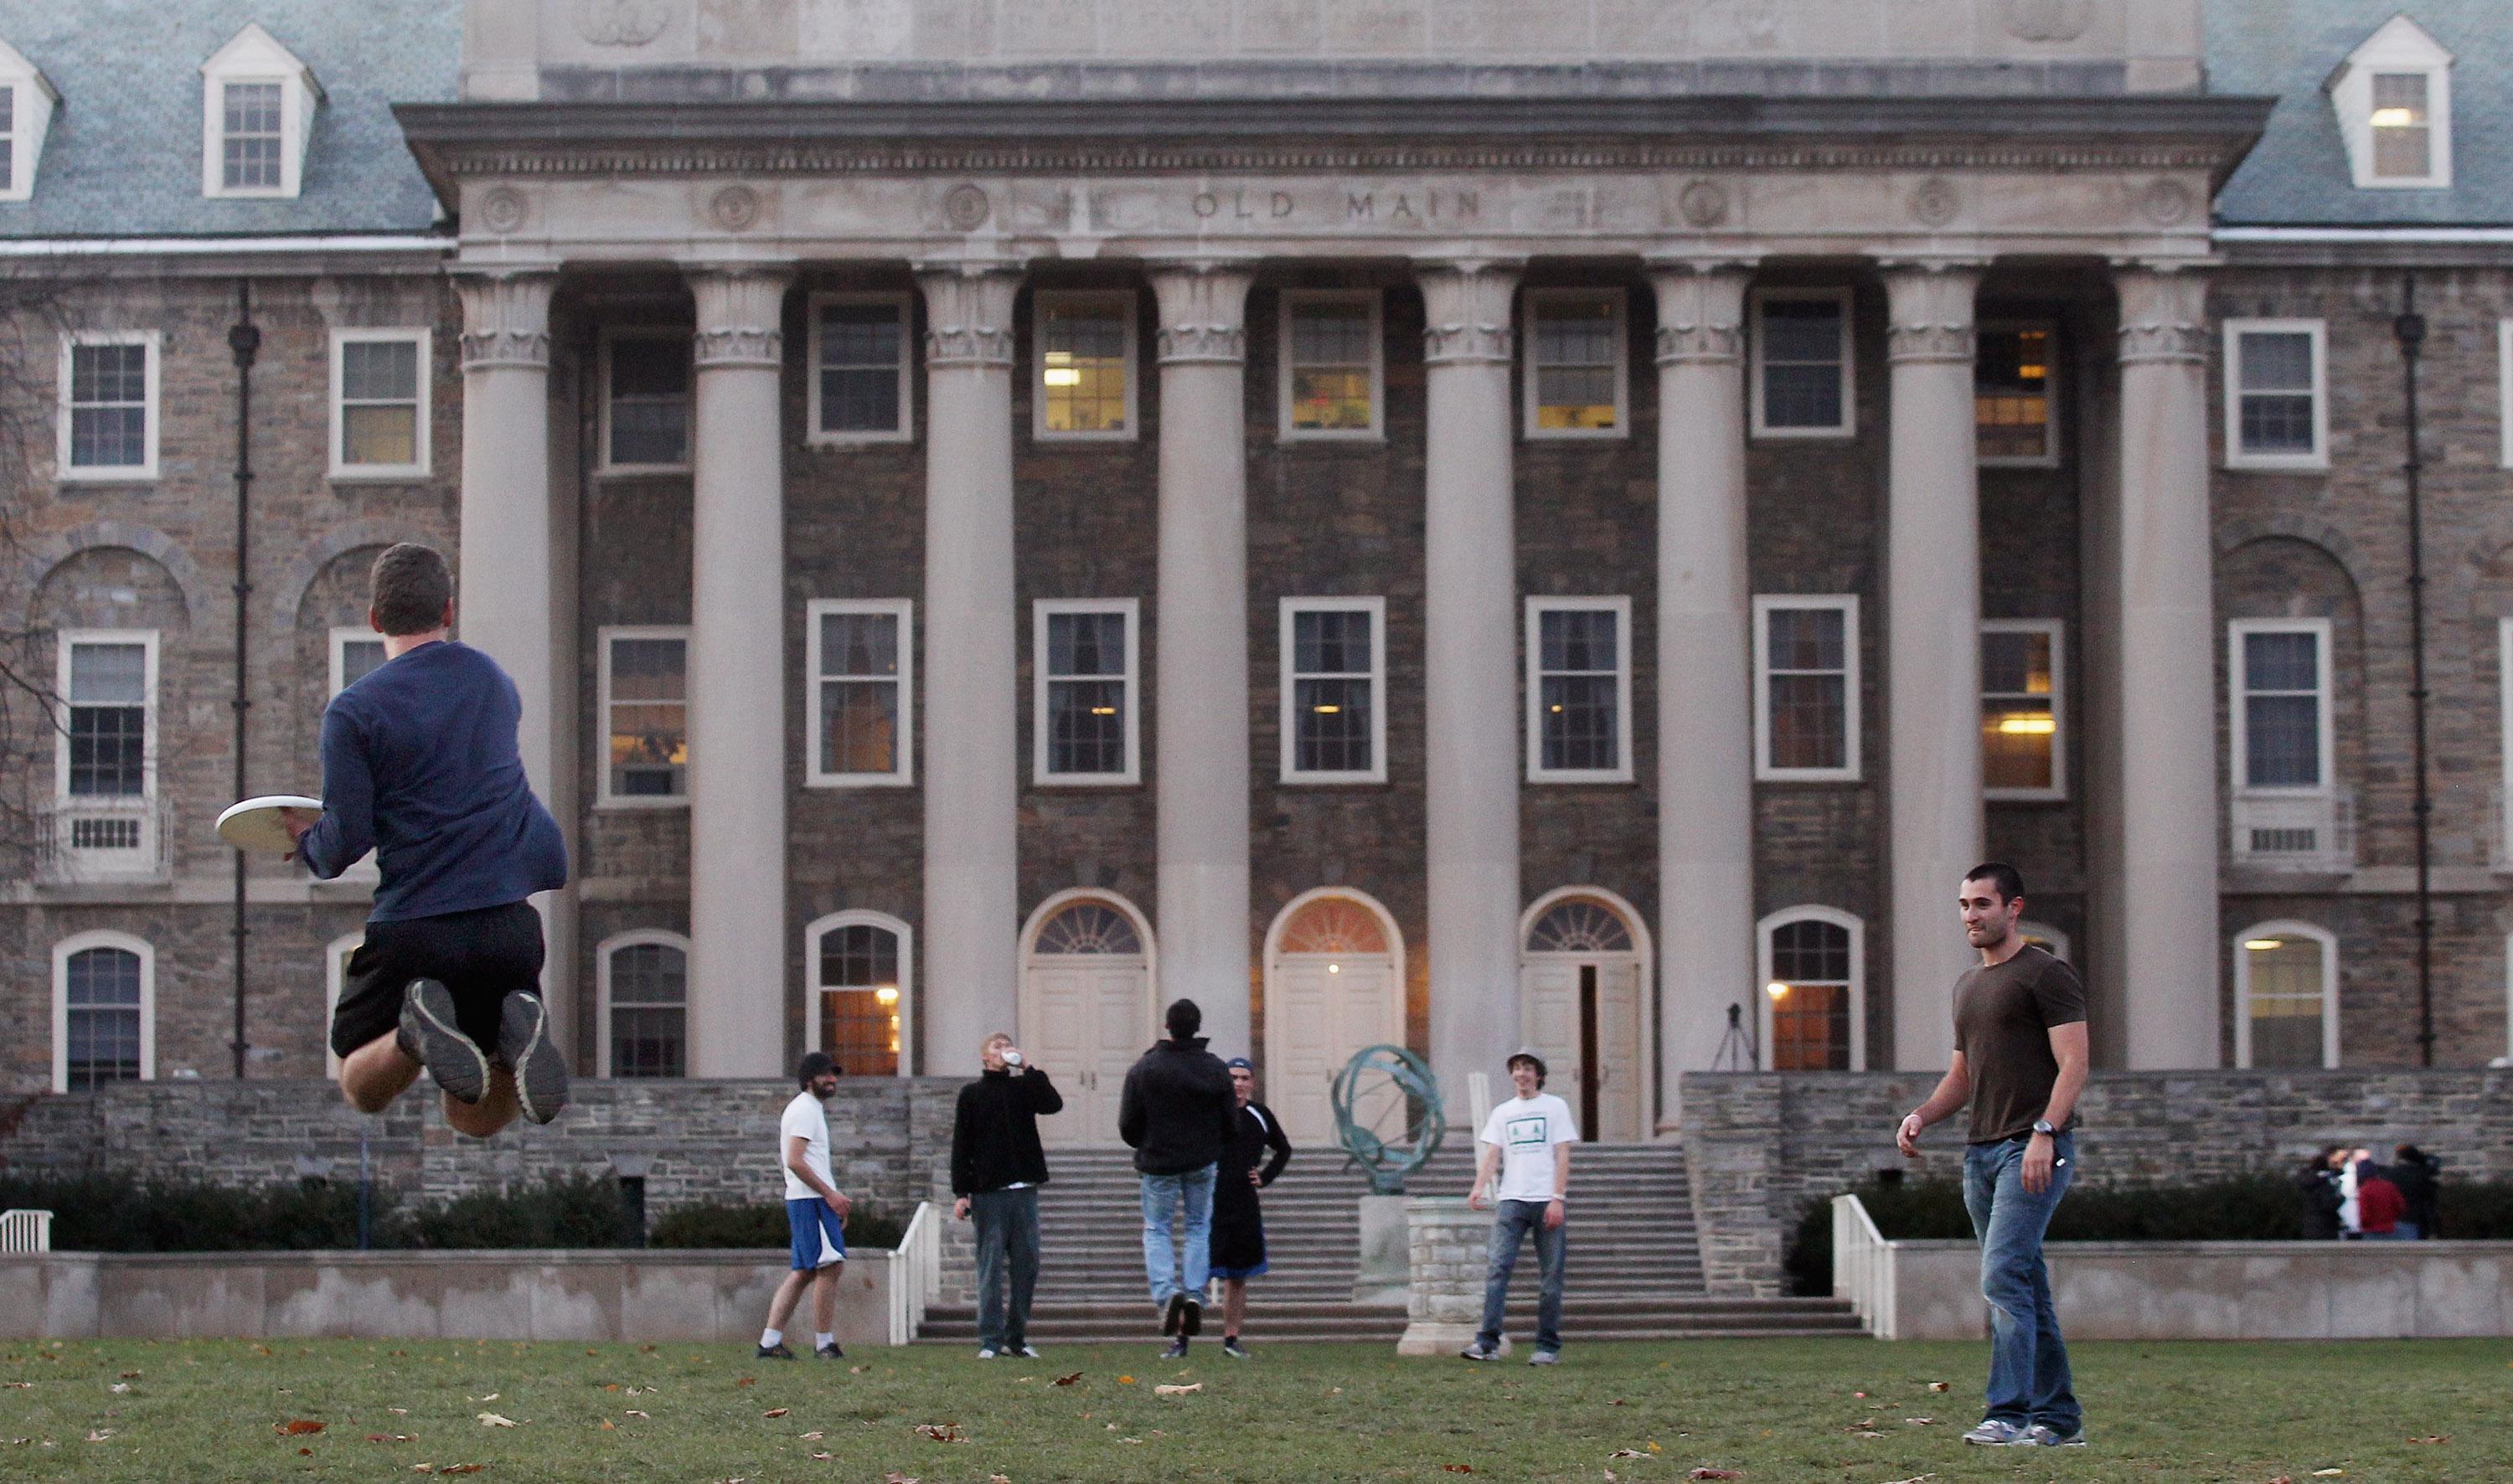 Kappa Delta Rho fraternity at Penn State Pictures of non-consenting nude women